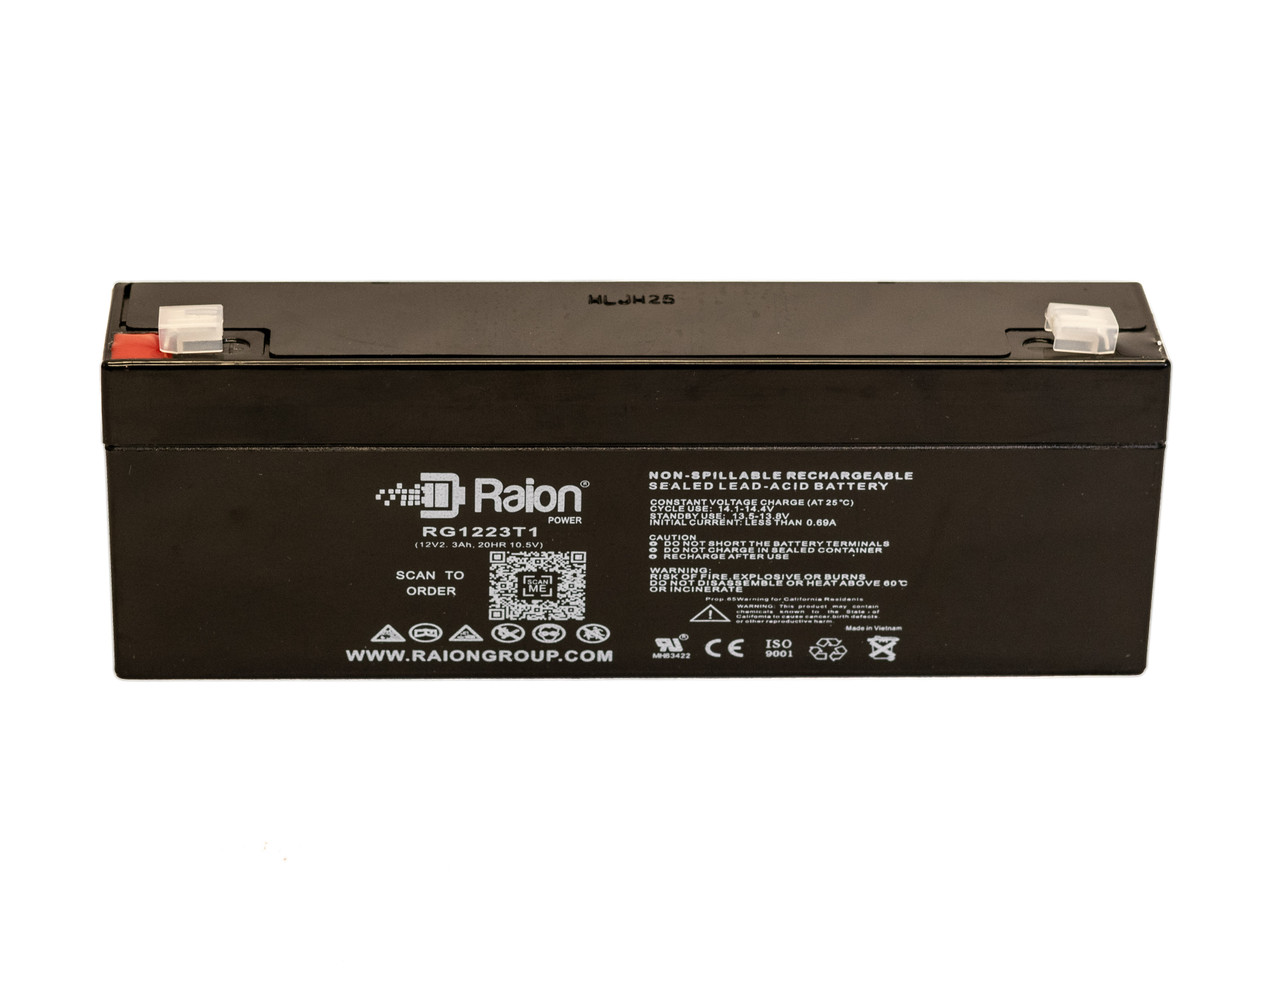 Raion Power 12V 2.3Ah SLA Battery With T1 Terminals For Datex-Ohmeda 3740, 3760 Oximeter